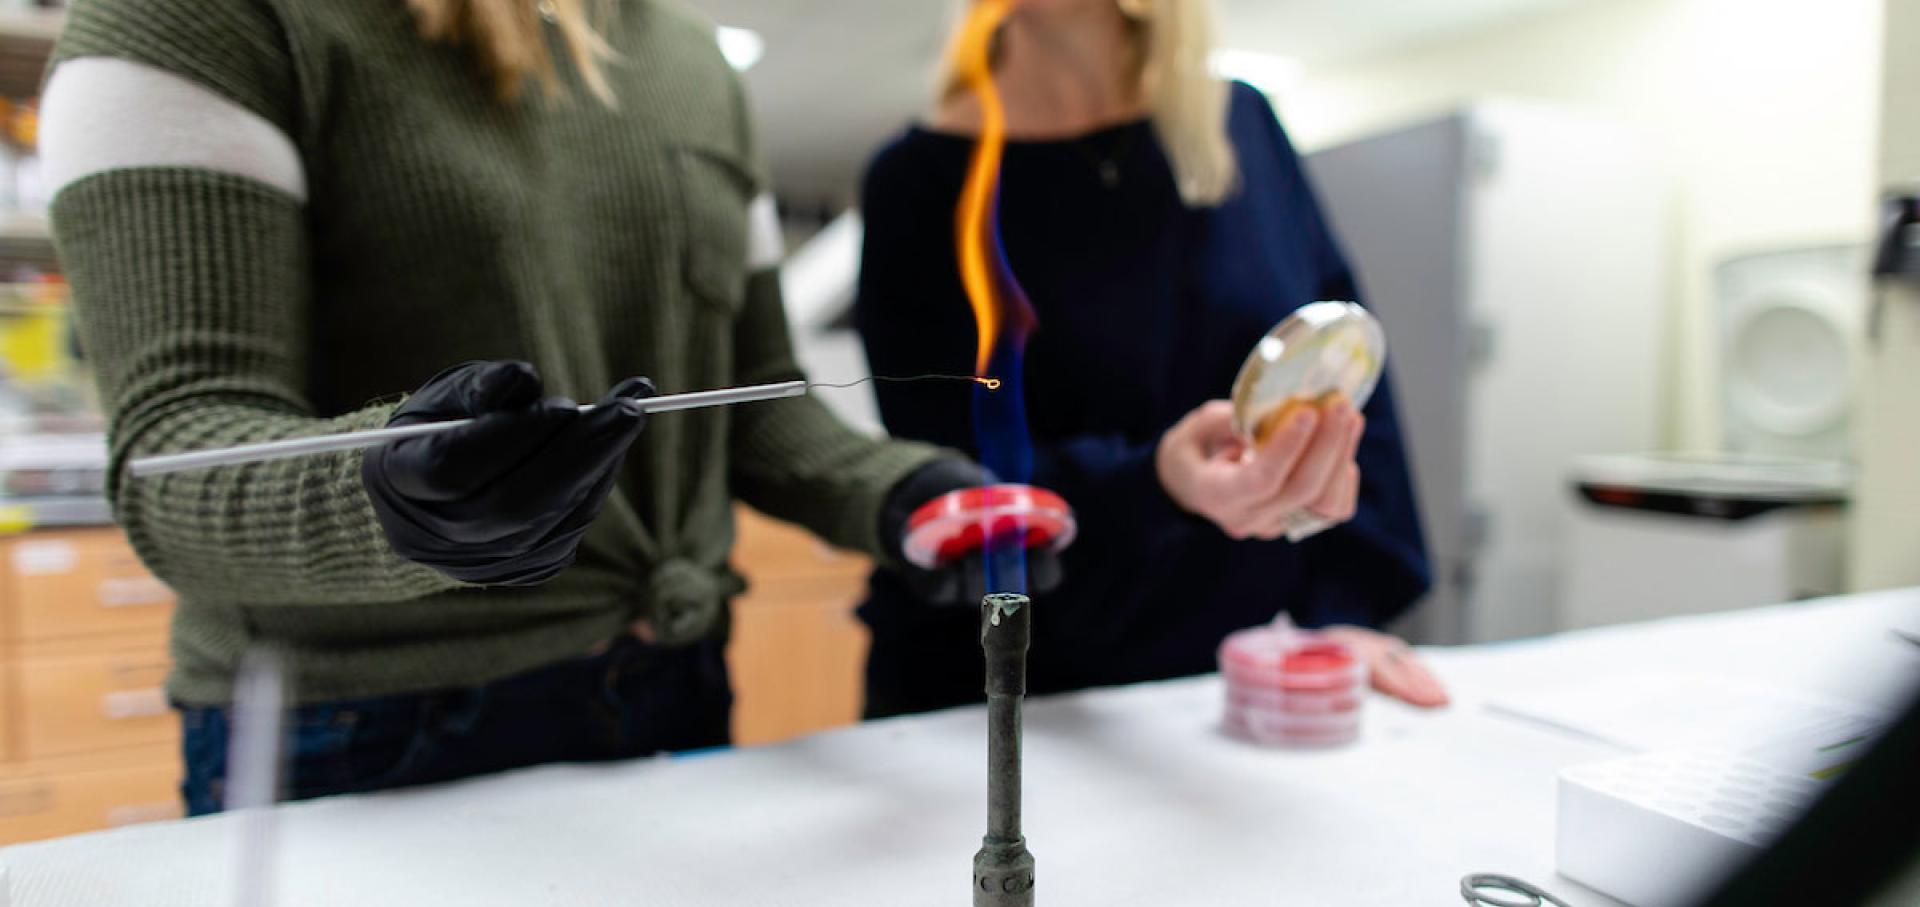 Student and professor working over bunsen burner flame